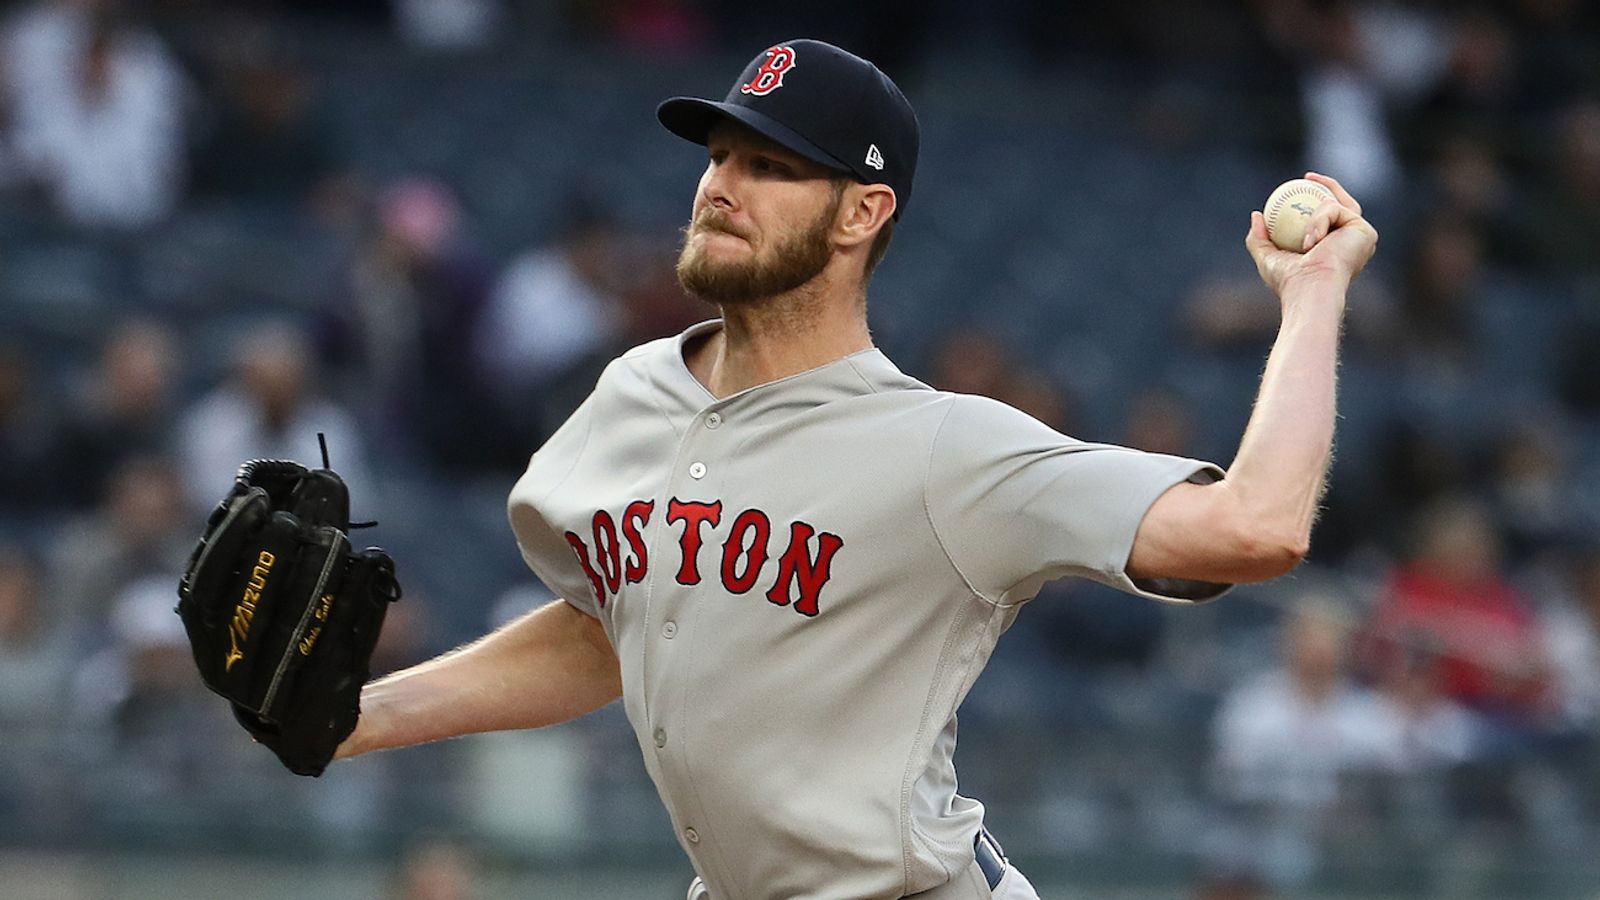 Red Sox ace Chris Sale returns to the mound with low expectations